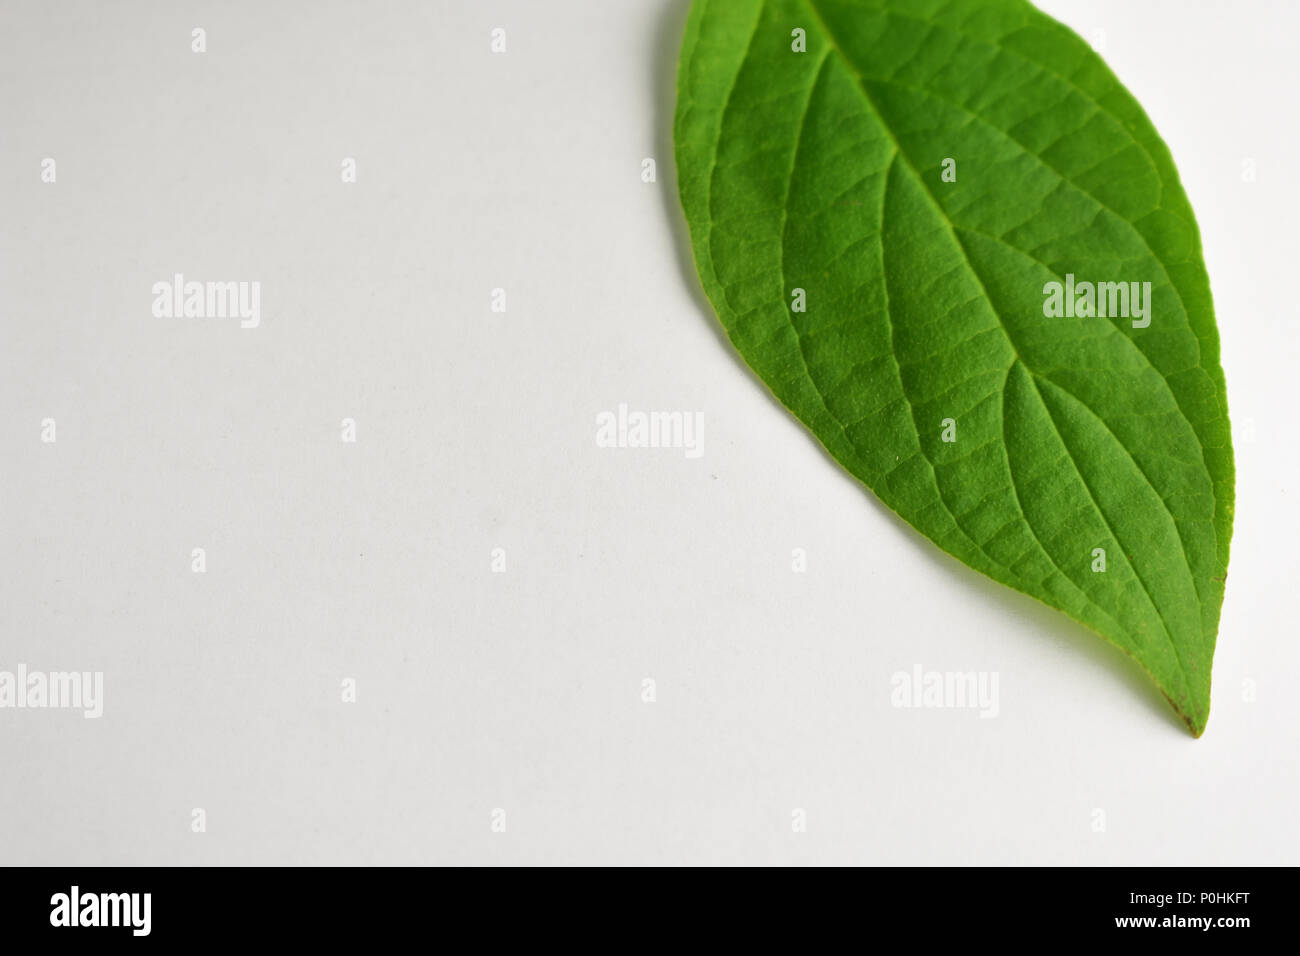 Bright green leafs background. Stock Photo